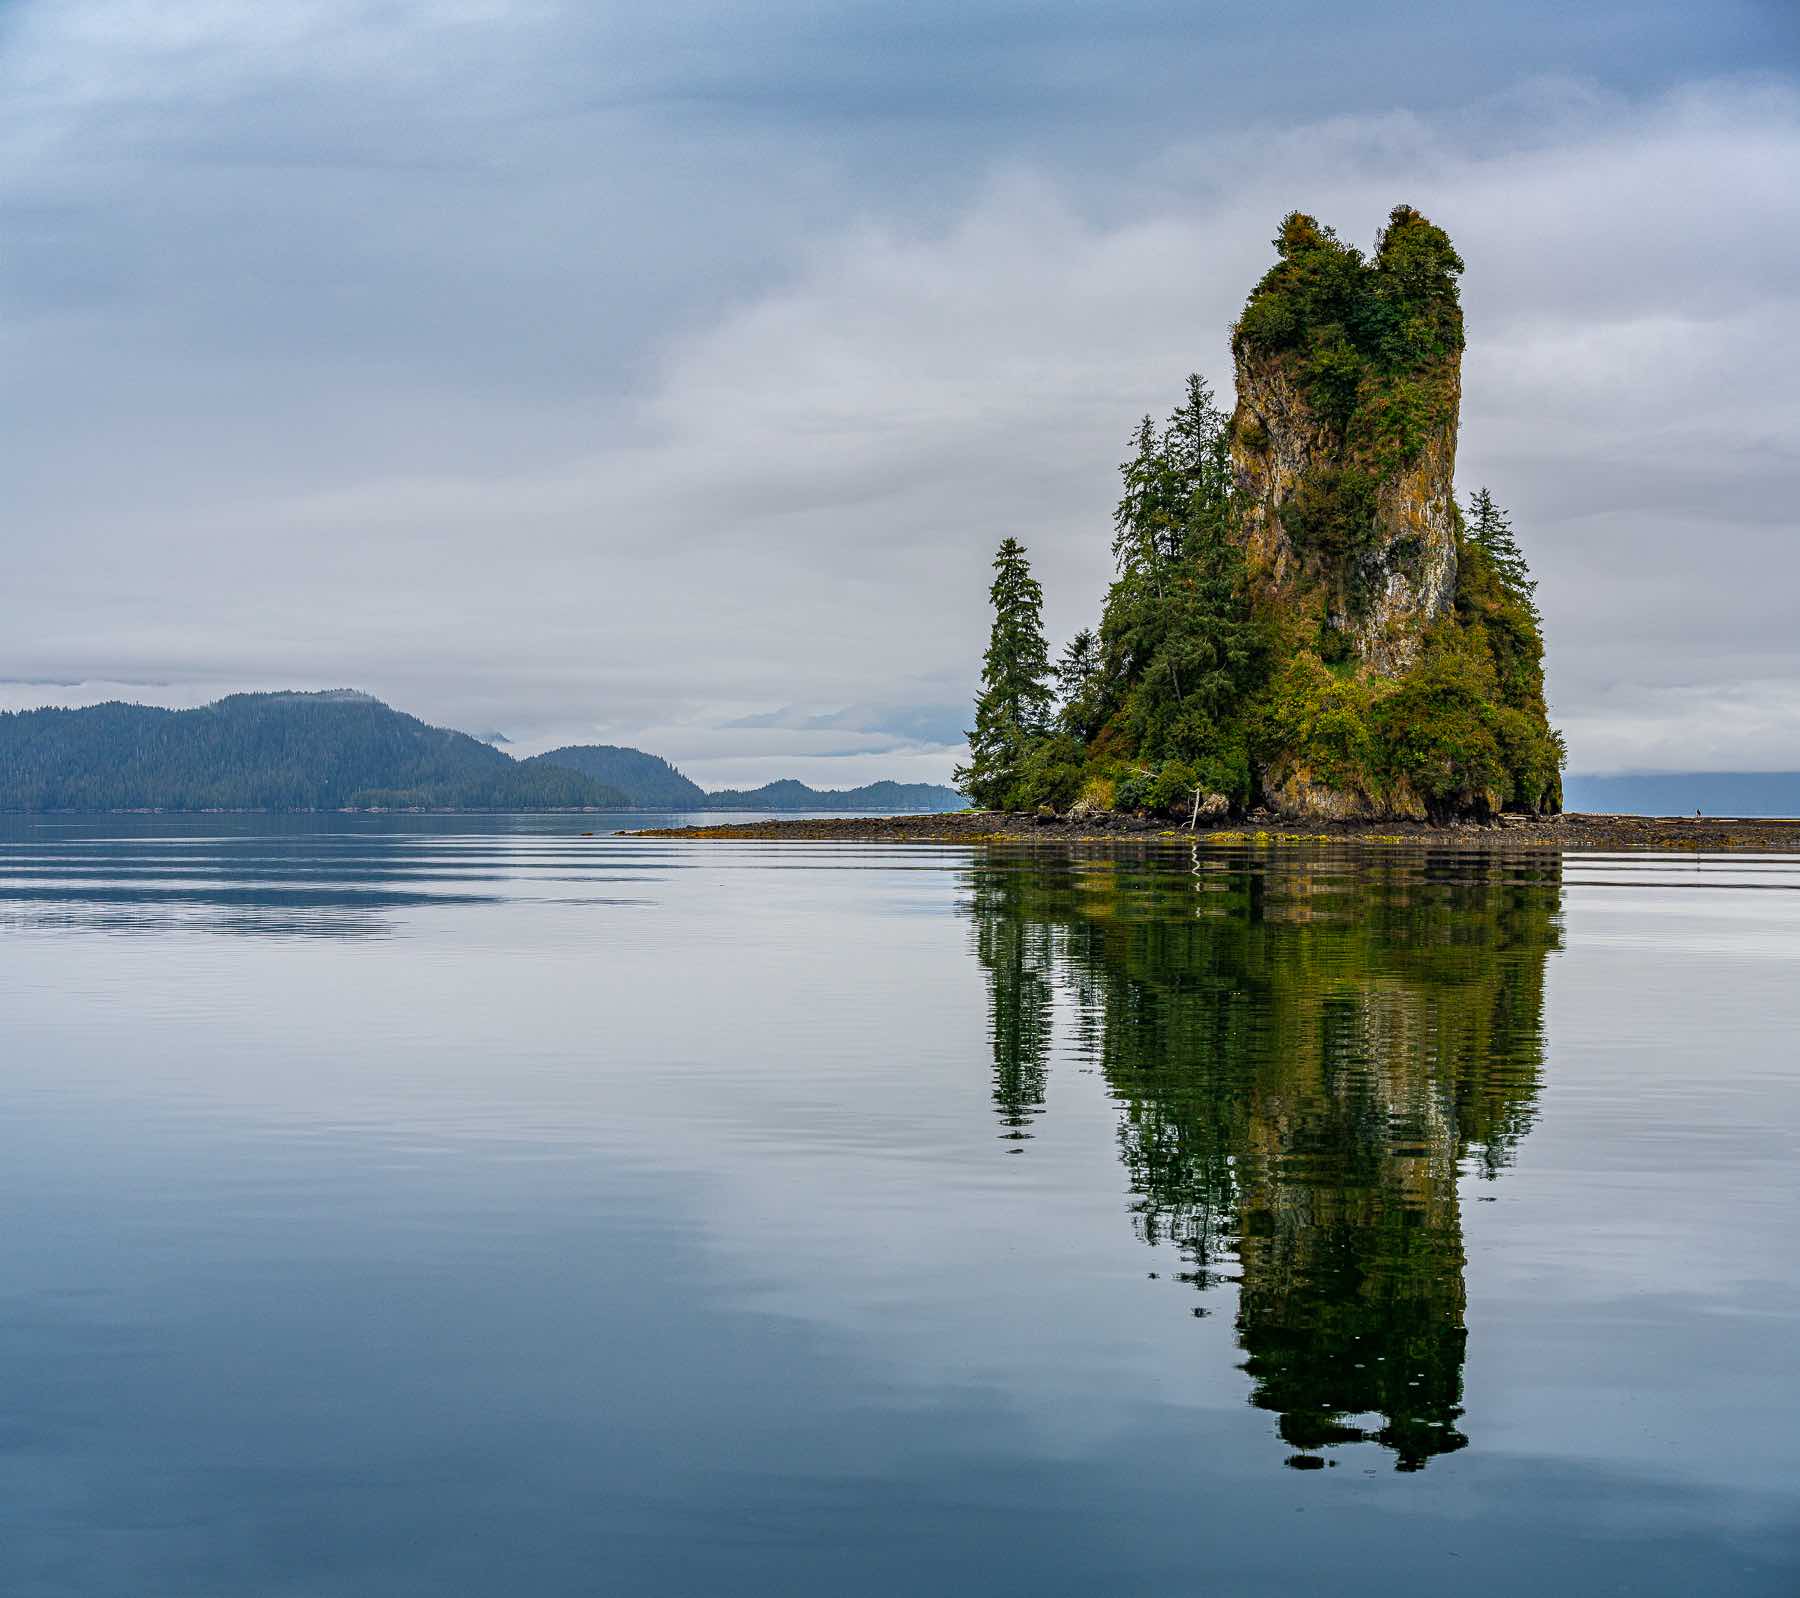 The New Eddystone Rock jutting from a small island wrapped inside a bay in the Misty Fjords.